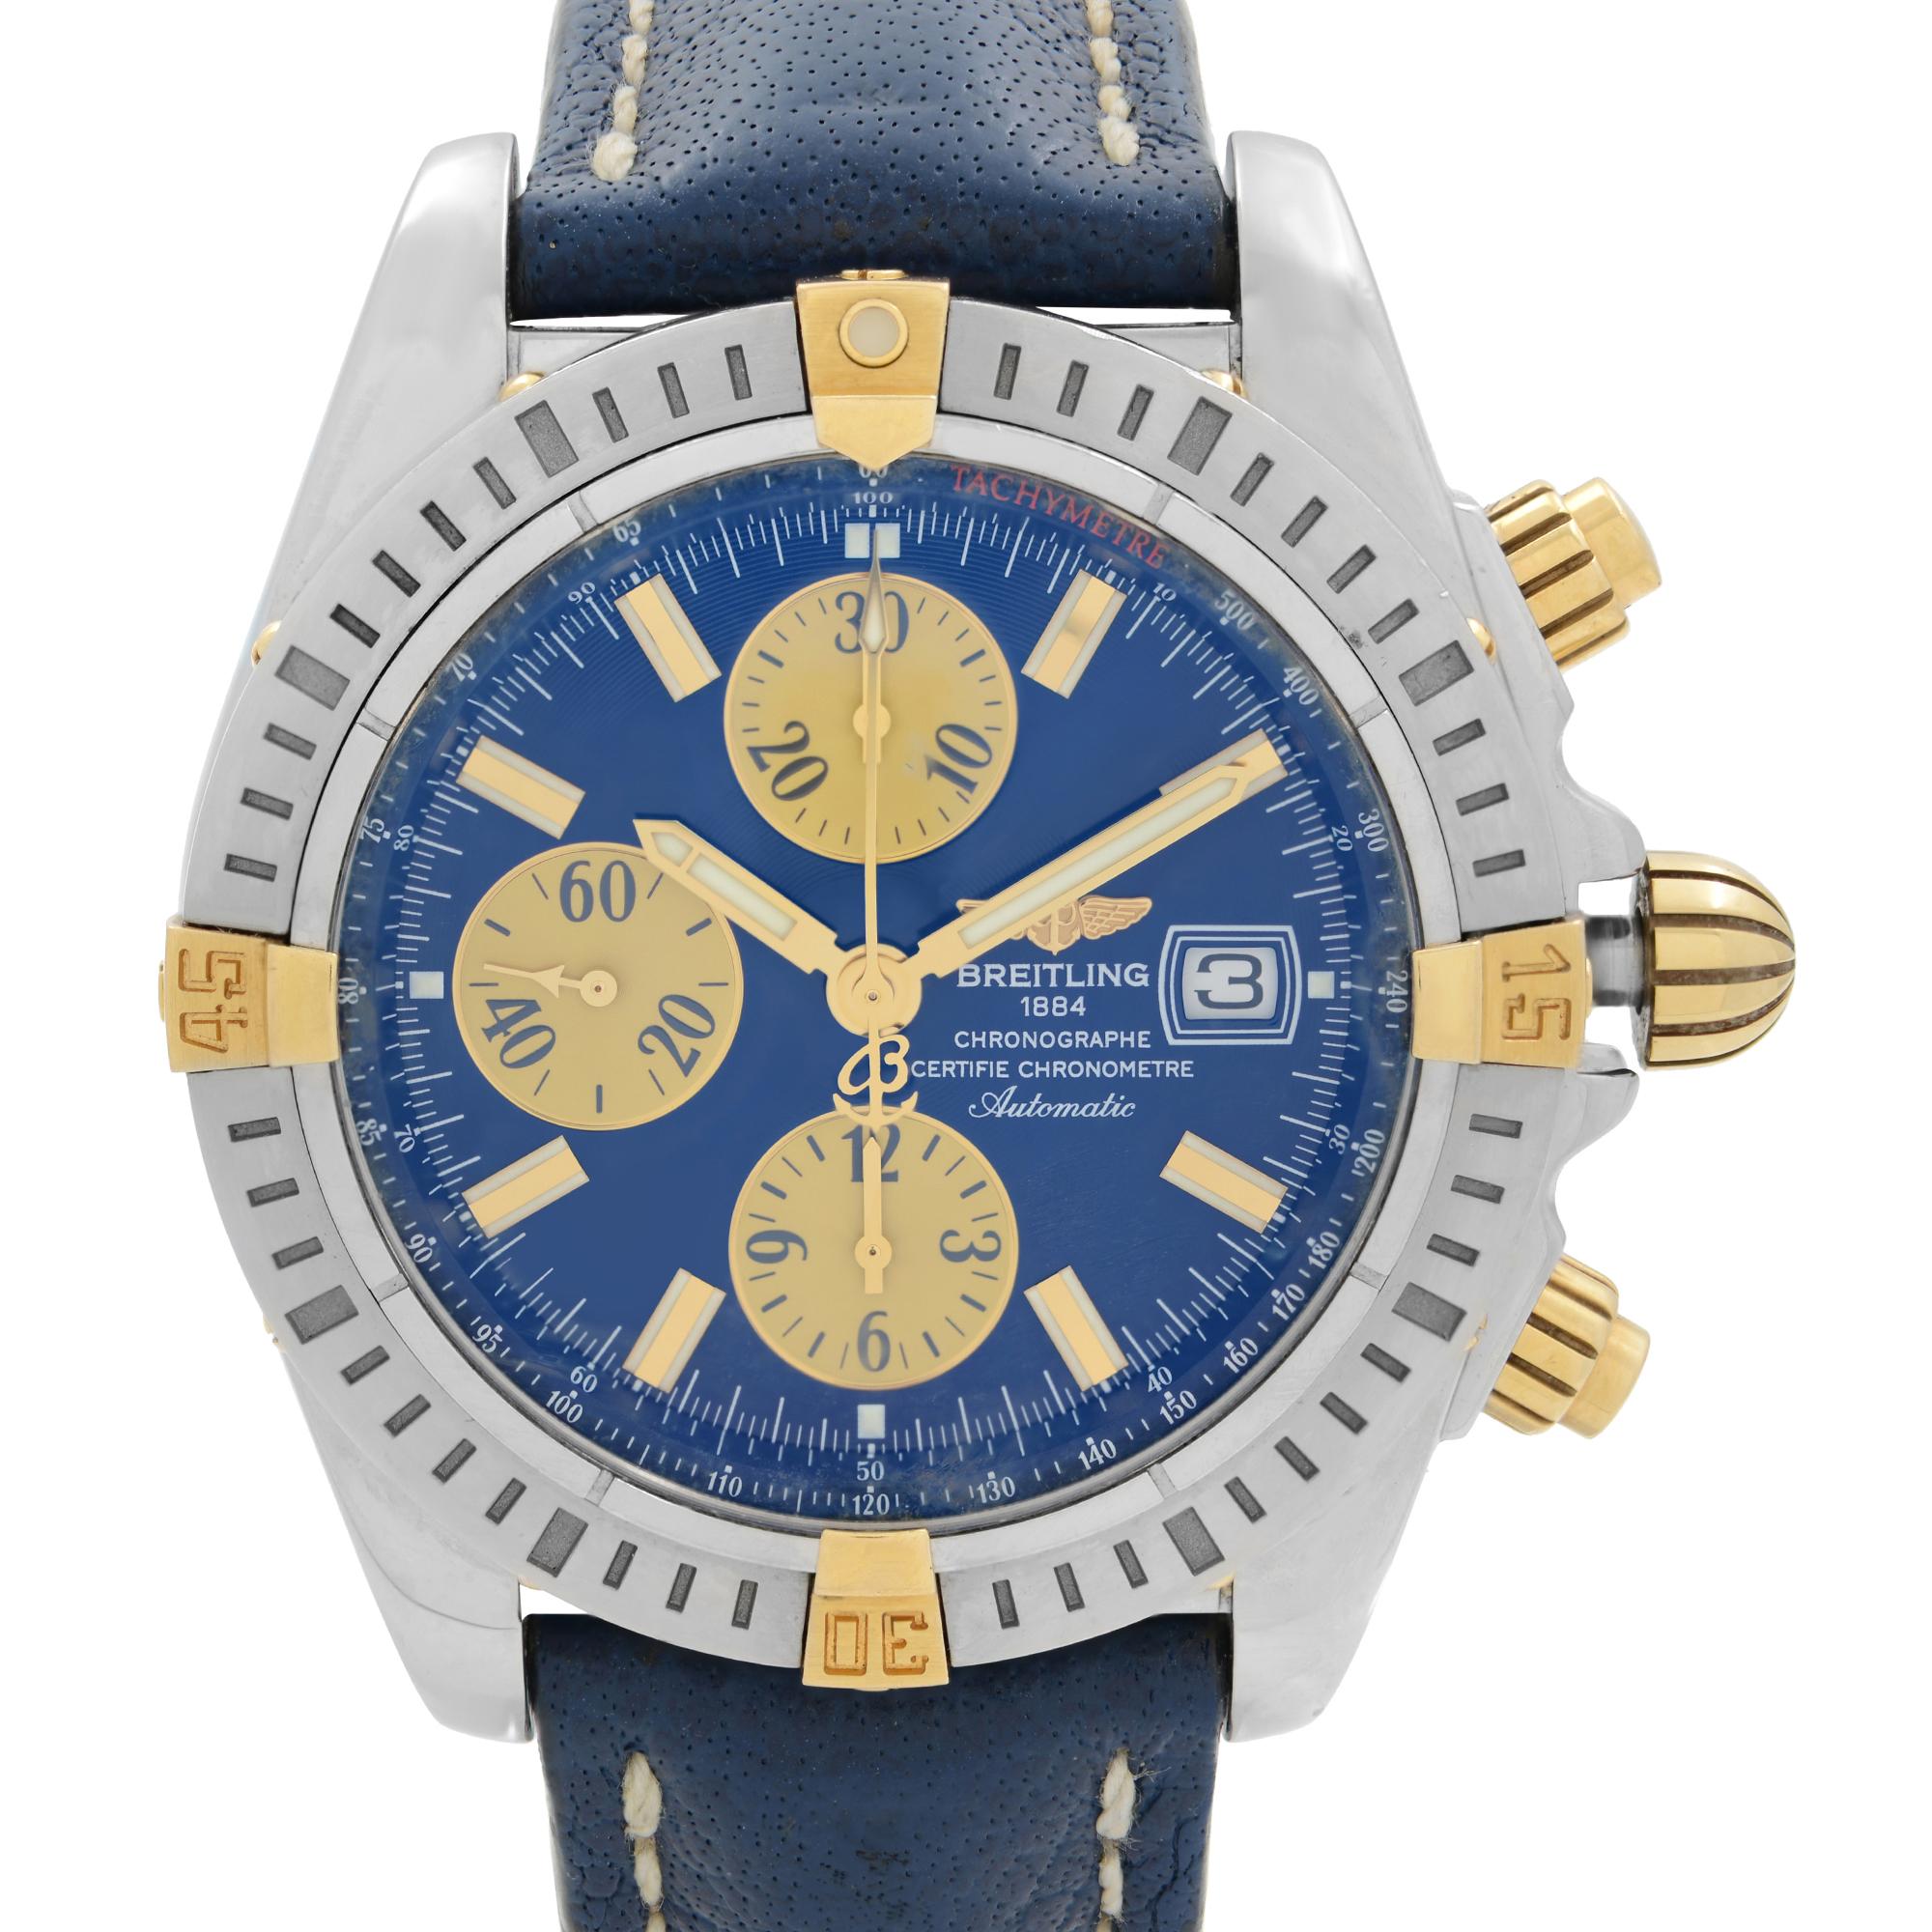 Pre-Owned Breitling Chronomat 43mm 18k Yellow Gold Stainless Steel Chronograph Blue Dial Men's Automatic Watch B1335611. This Watch was Produced in 2005-2007. The Timepiece is powered by an Automatic movement. Features: Polished Stainless Steel case